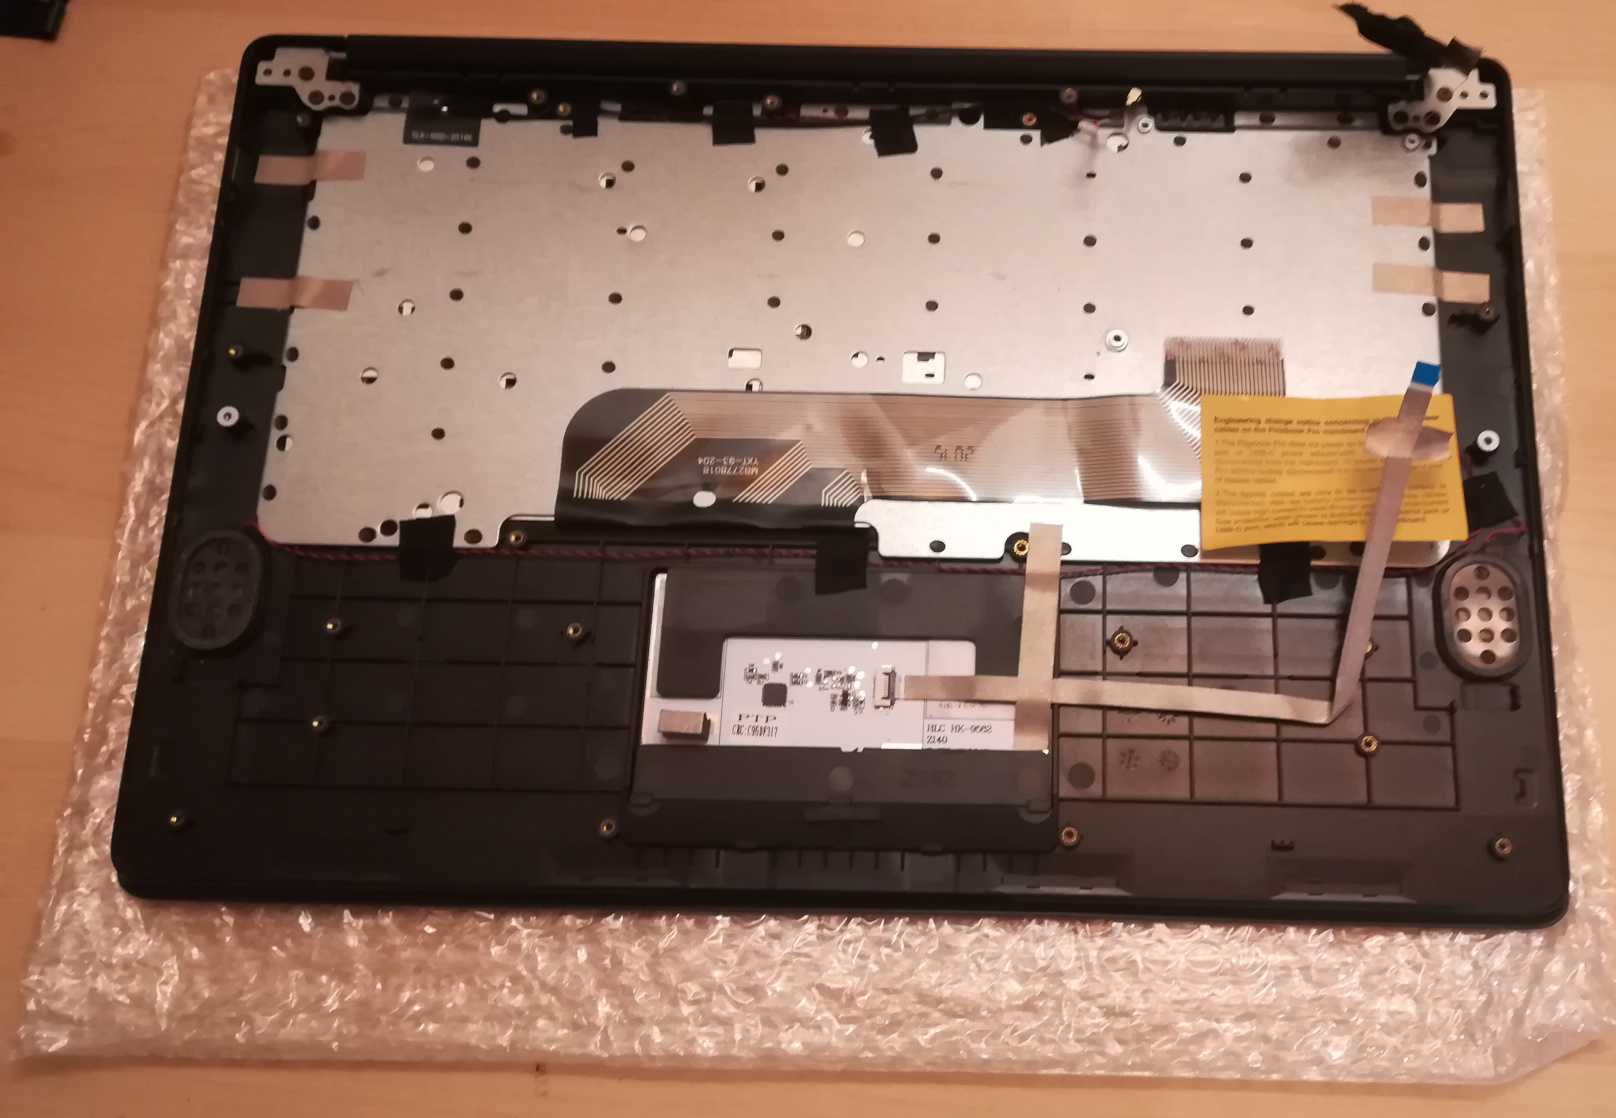 Pinebook Pro new keyboard all boards removed